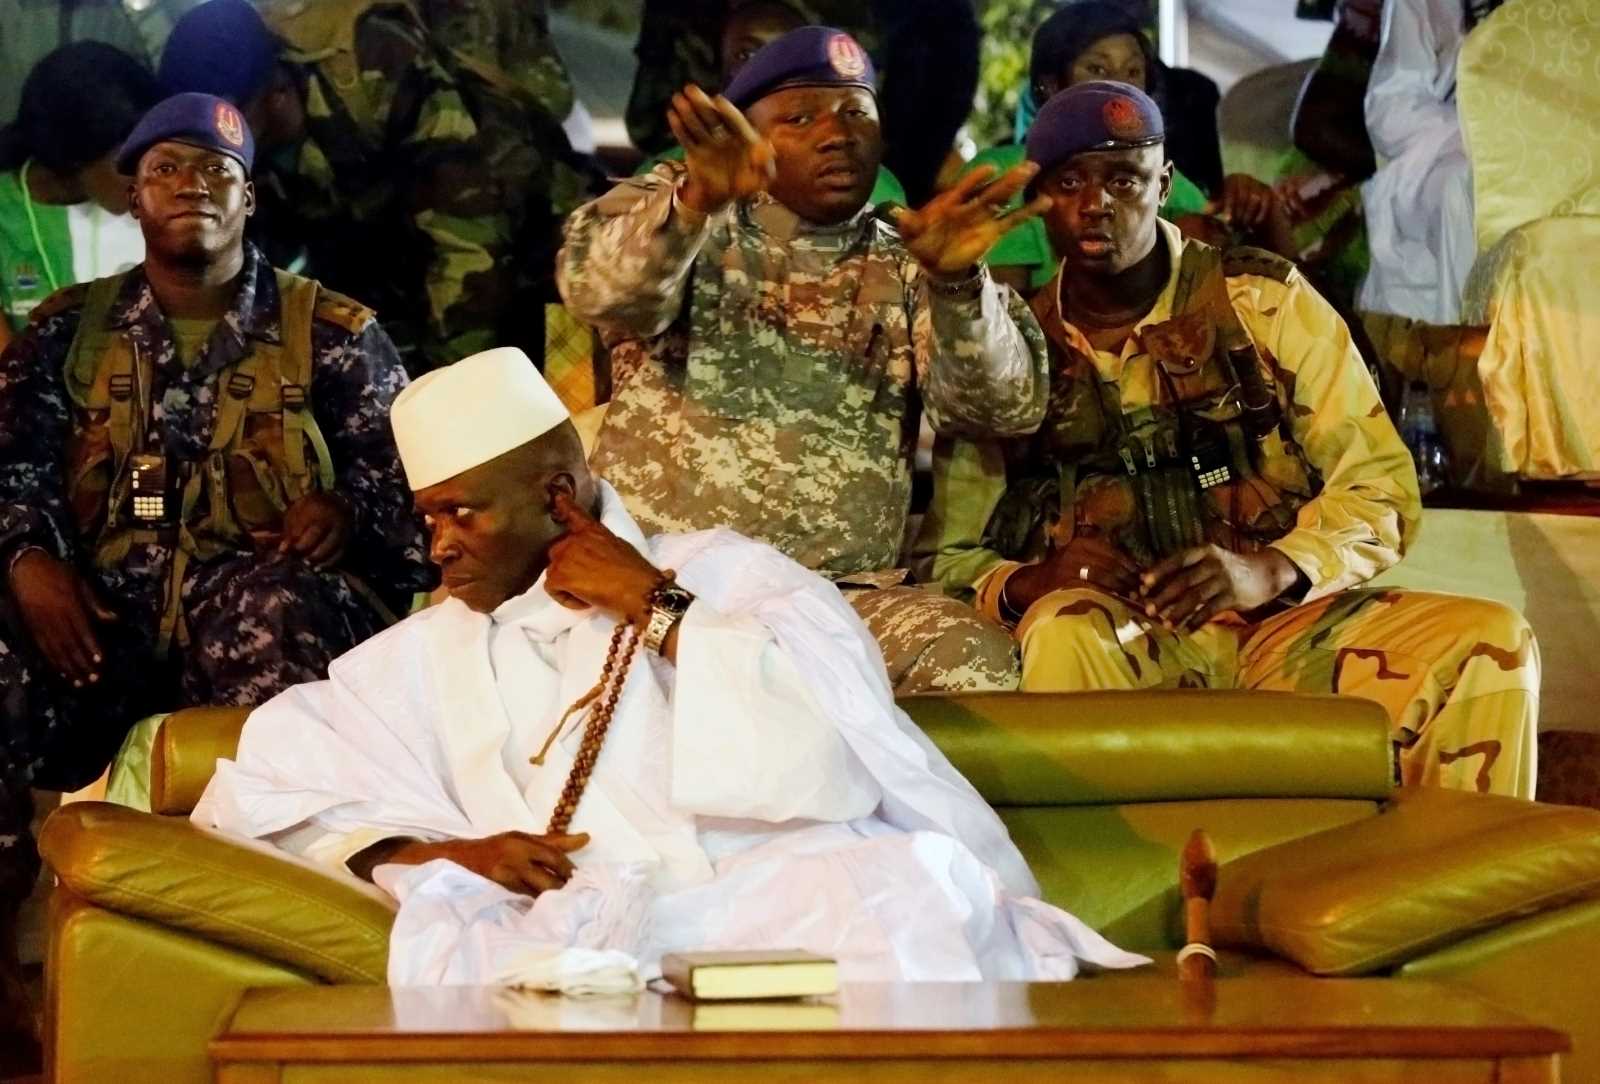 Yahya Jammeh’s rule relied on brute force.